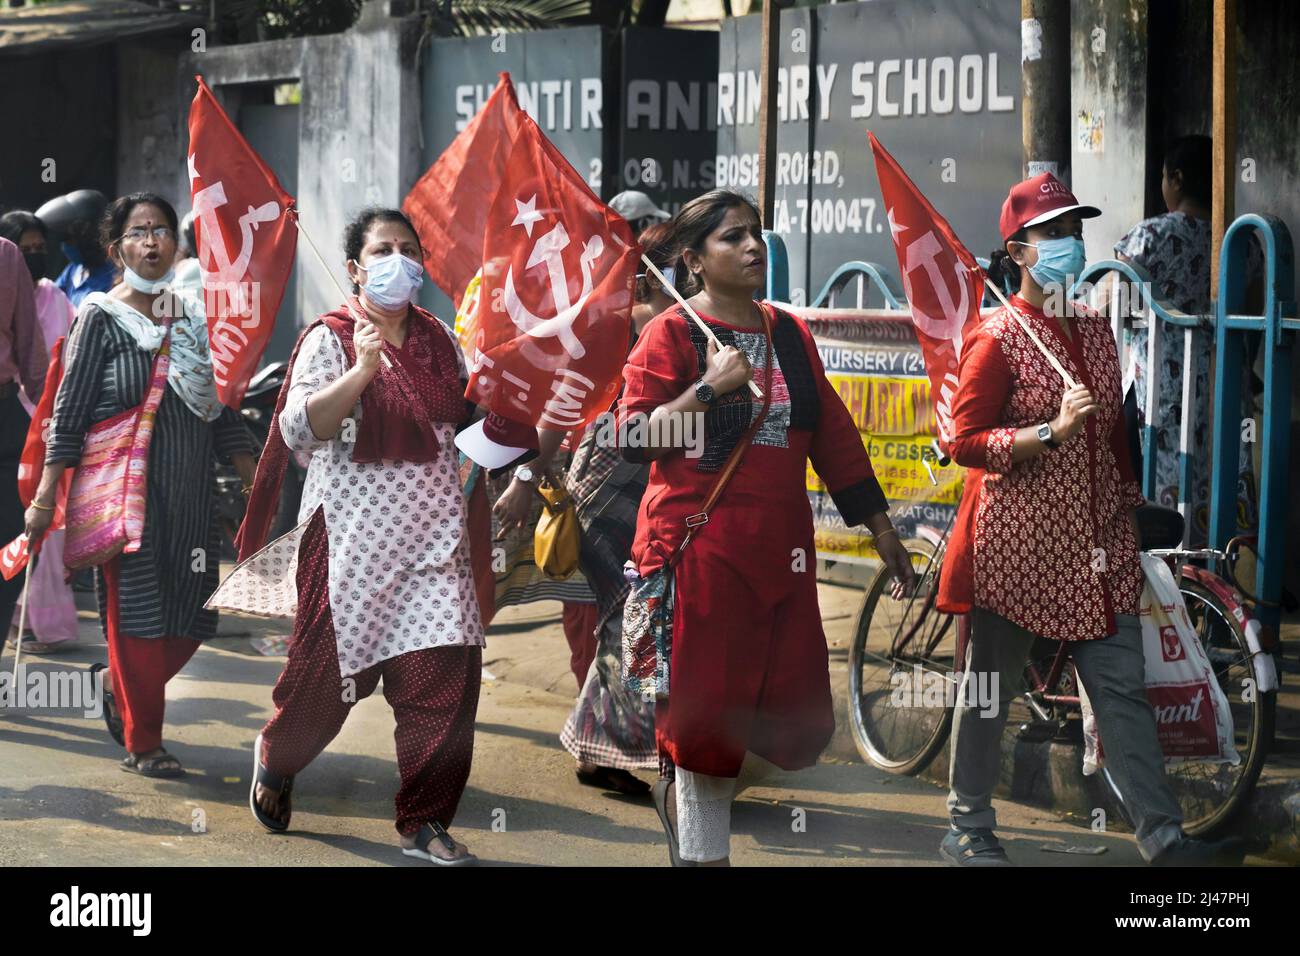 Communist party protesters march with hammer and sickle flags through a street in Kolkata, India Stock Photo